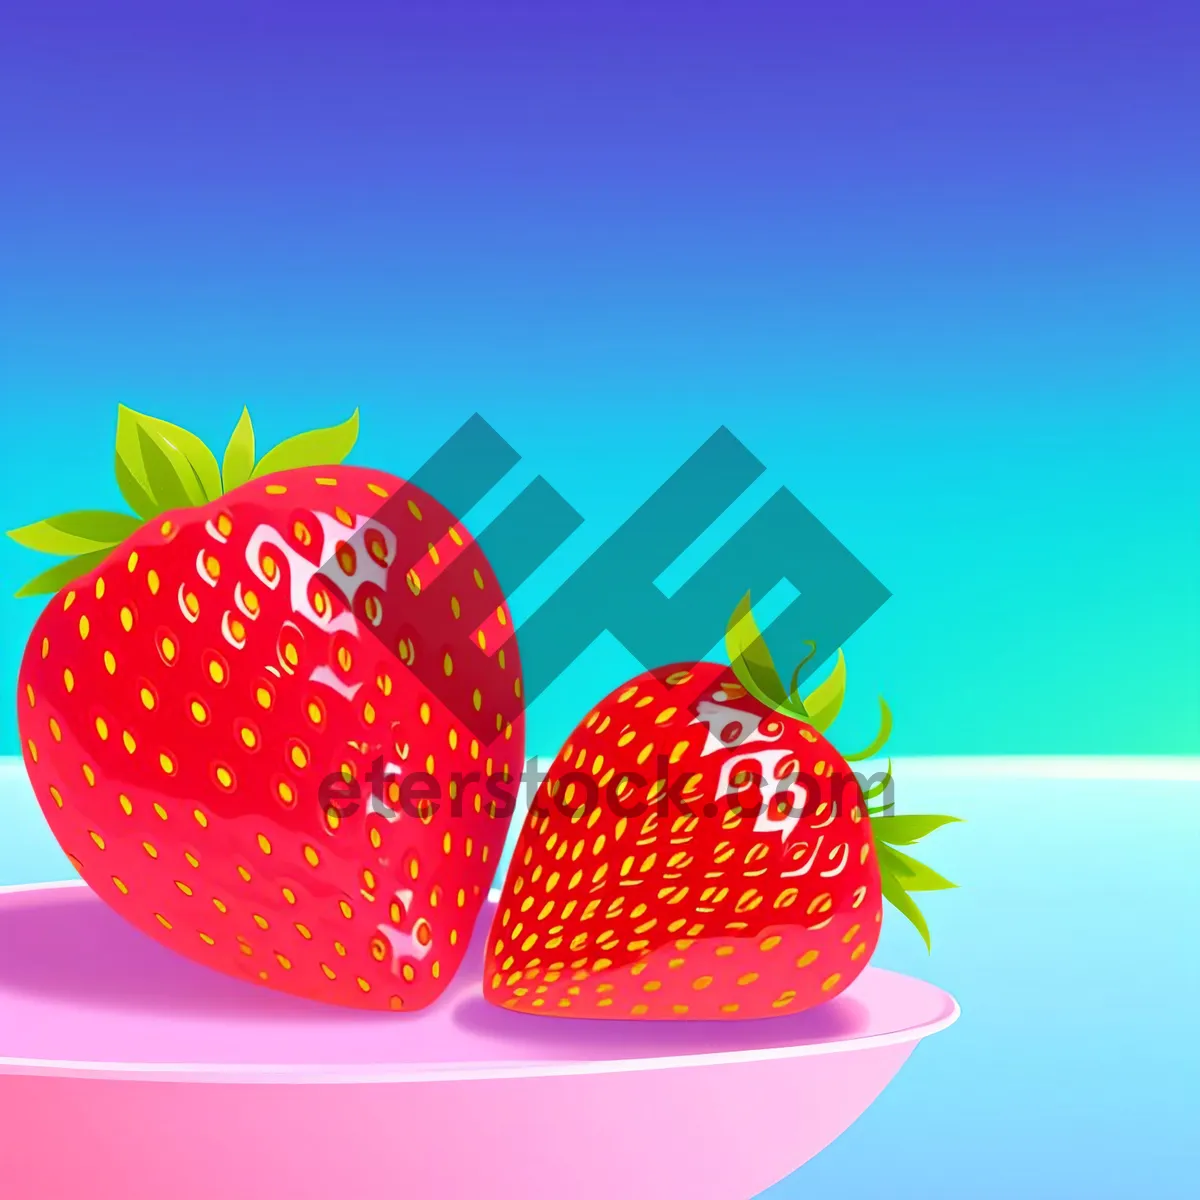 Picture of Juicy Strawberry - Fresh, Ripe, and Sweet